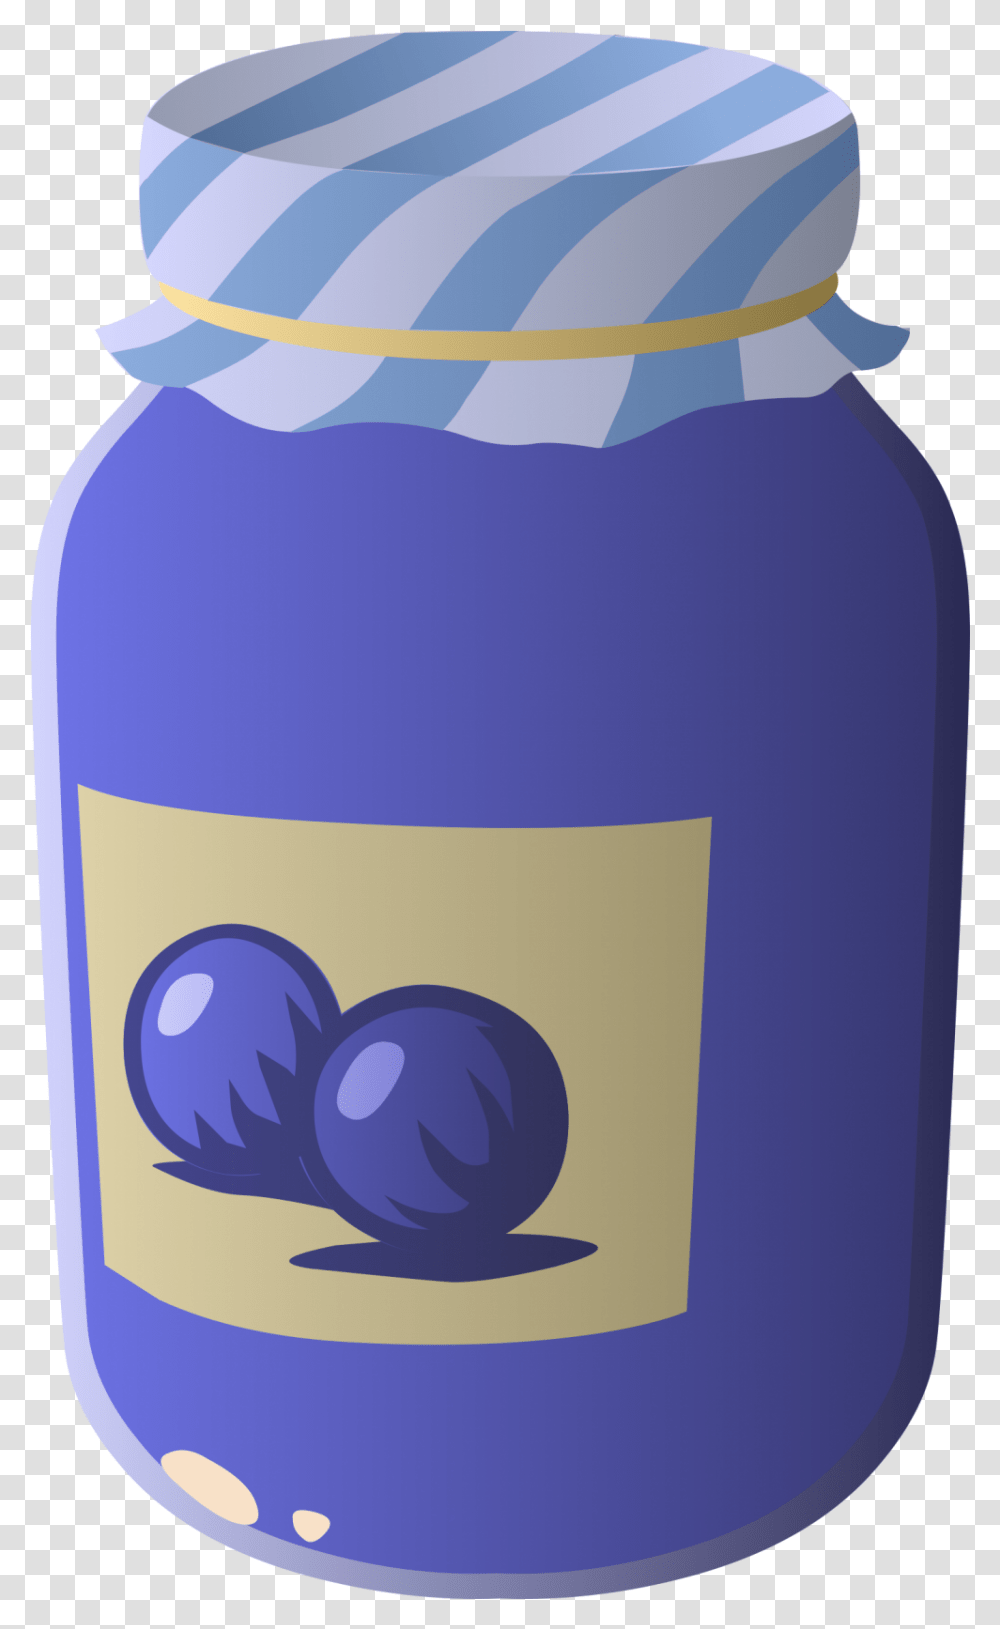 Jelly Image For Designing Projects Blueberry Jam Clipart, Bottle, Jar, Plant, Can Transparent Png